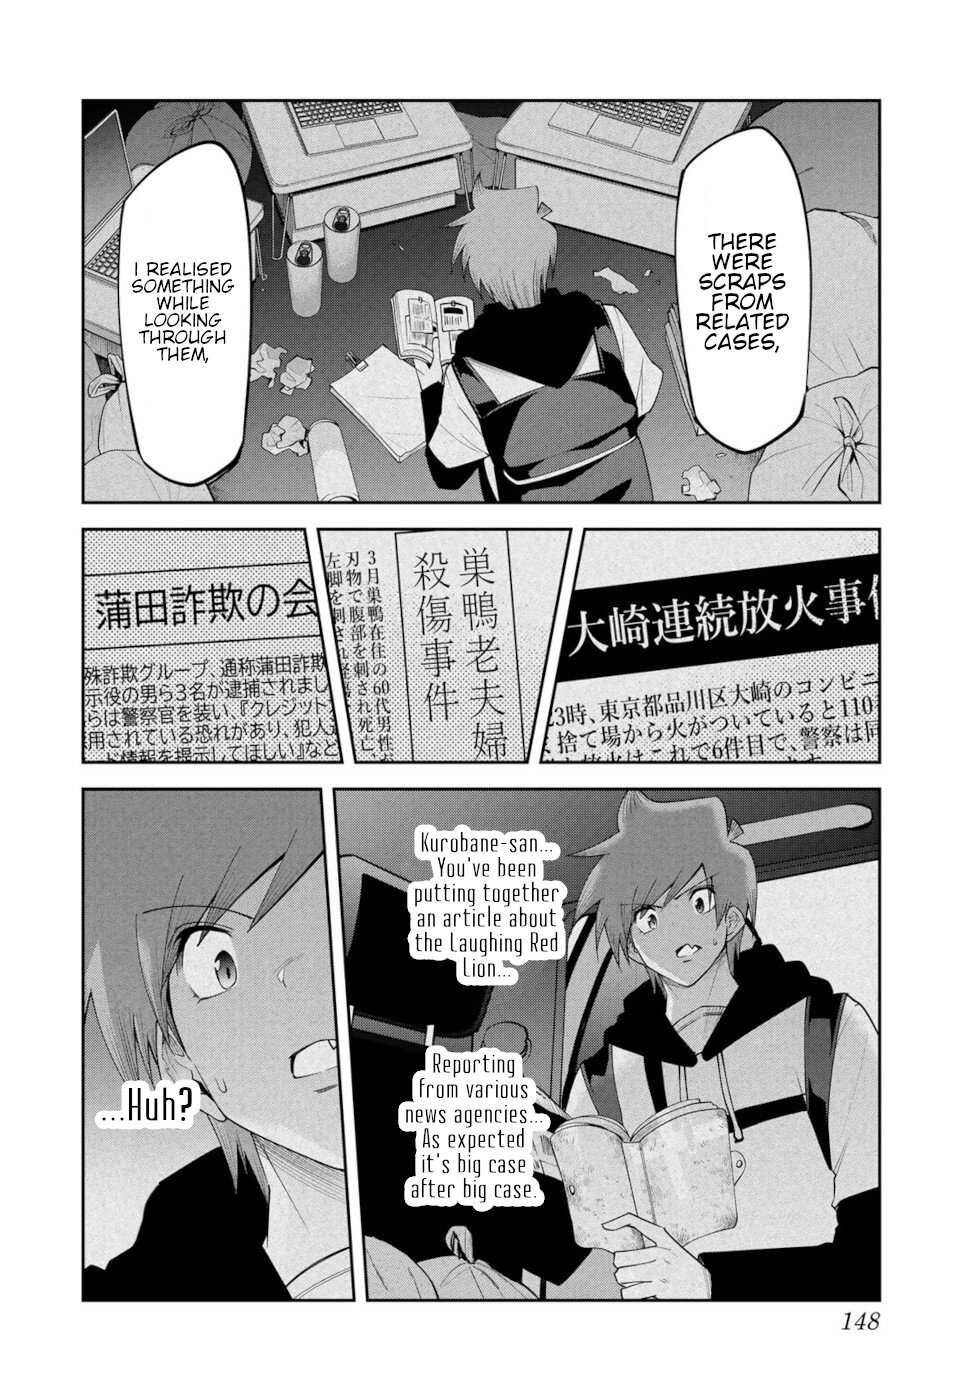 Tokyo Neon Scandal Vol.8 Chapter 81: The Laughing Red Lion 25 - Picture 2